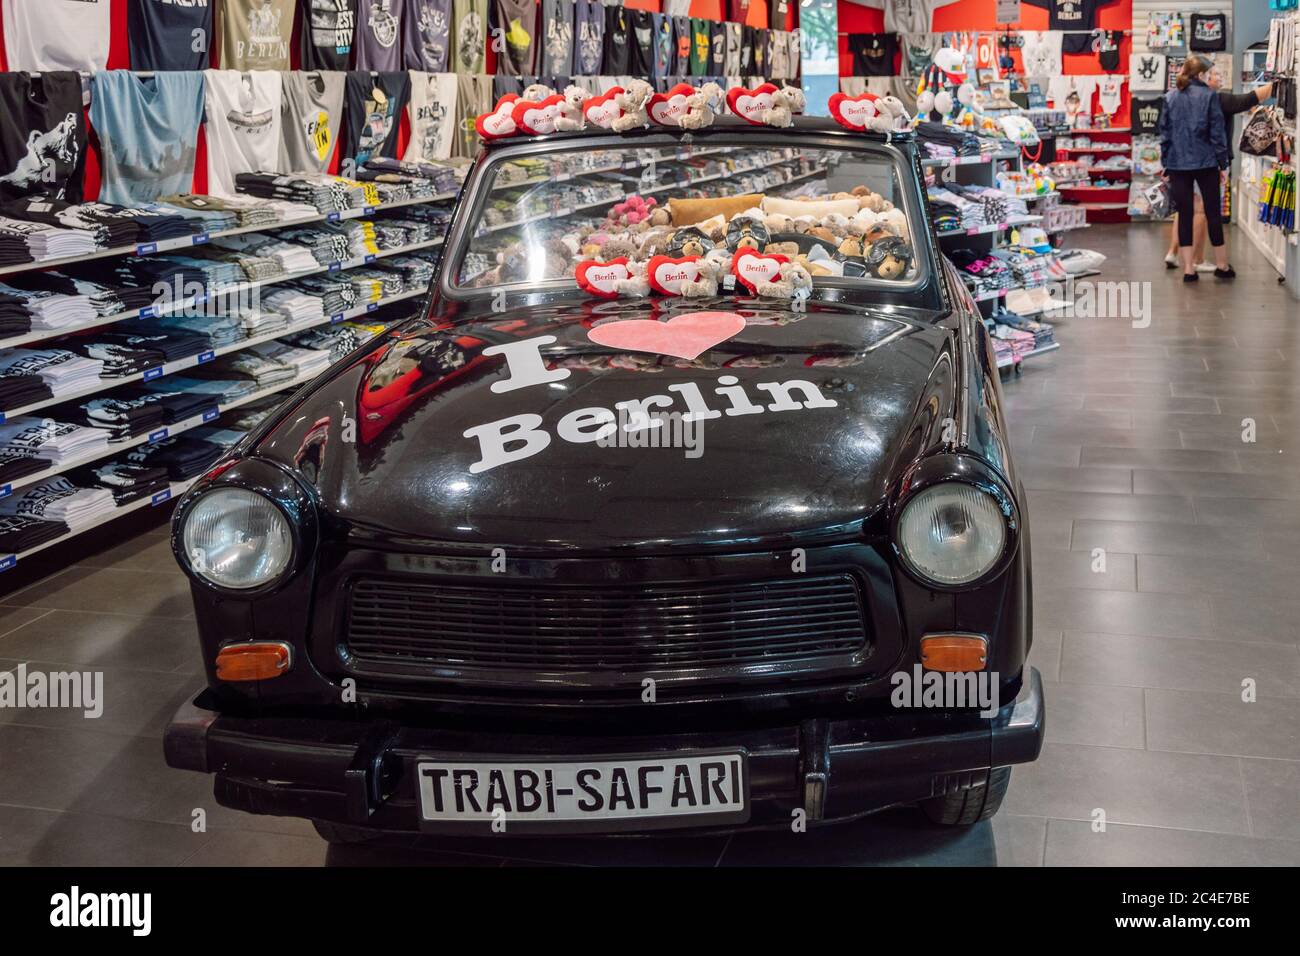 Black Trabant 601 cabrio classic car  from the former DDR parked in a souvenir shop. The car saloon is full of stuffed animals, Berlin, Germany. Stock Photo